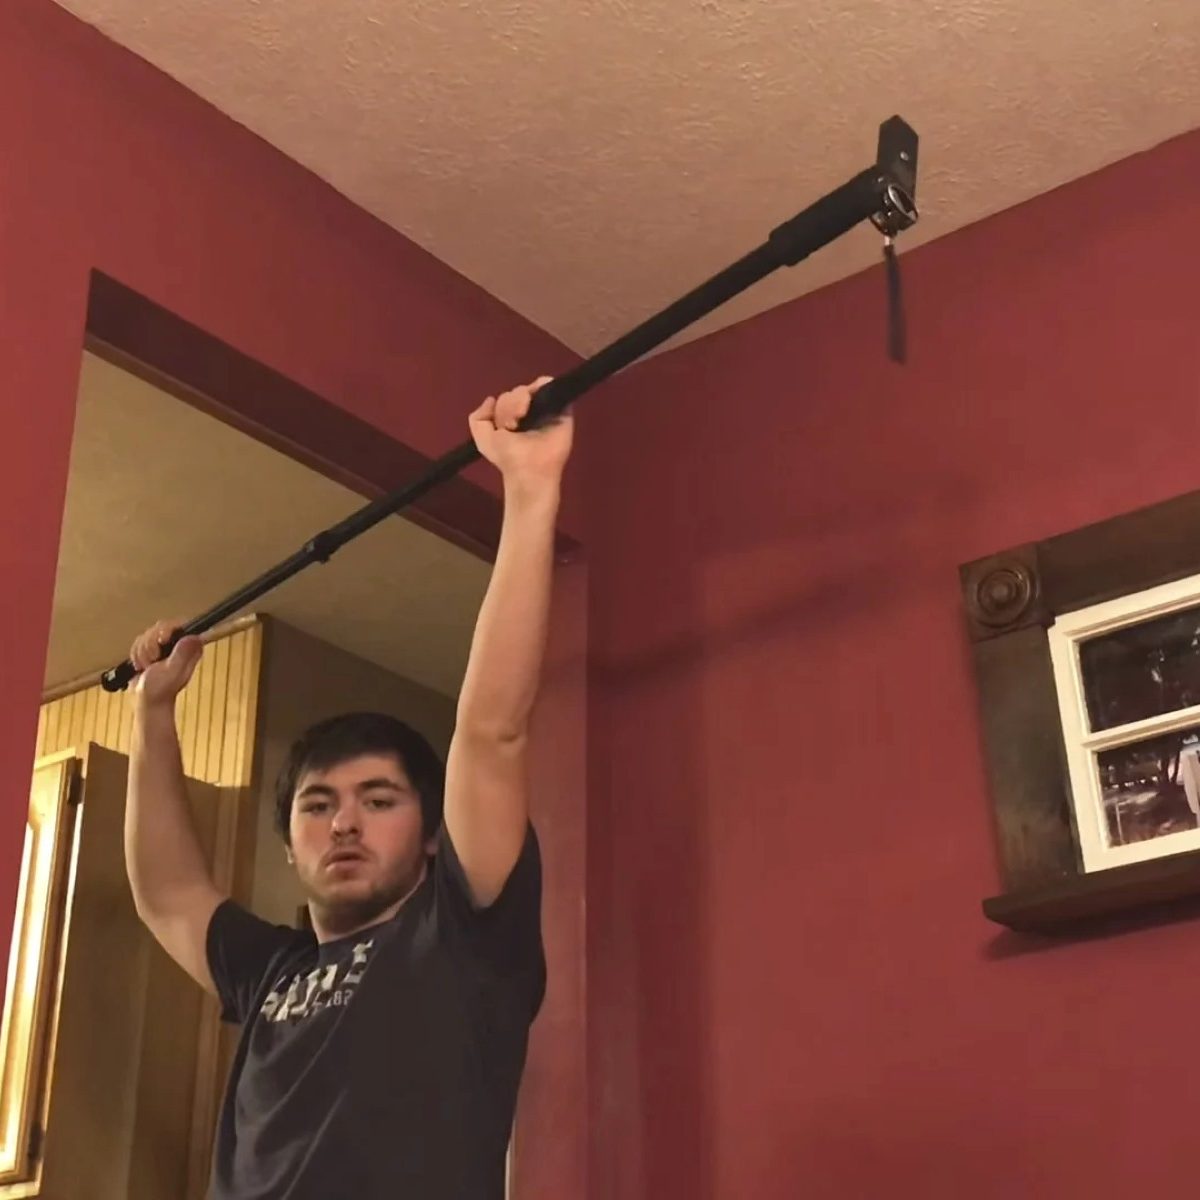 Attaching A Boom Mic To Your Monopod: A Step-by-Step Tutorial